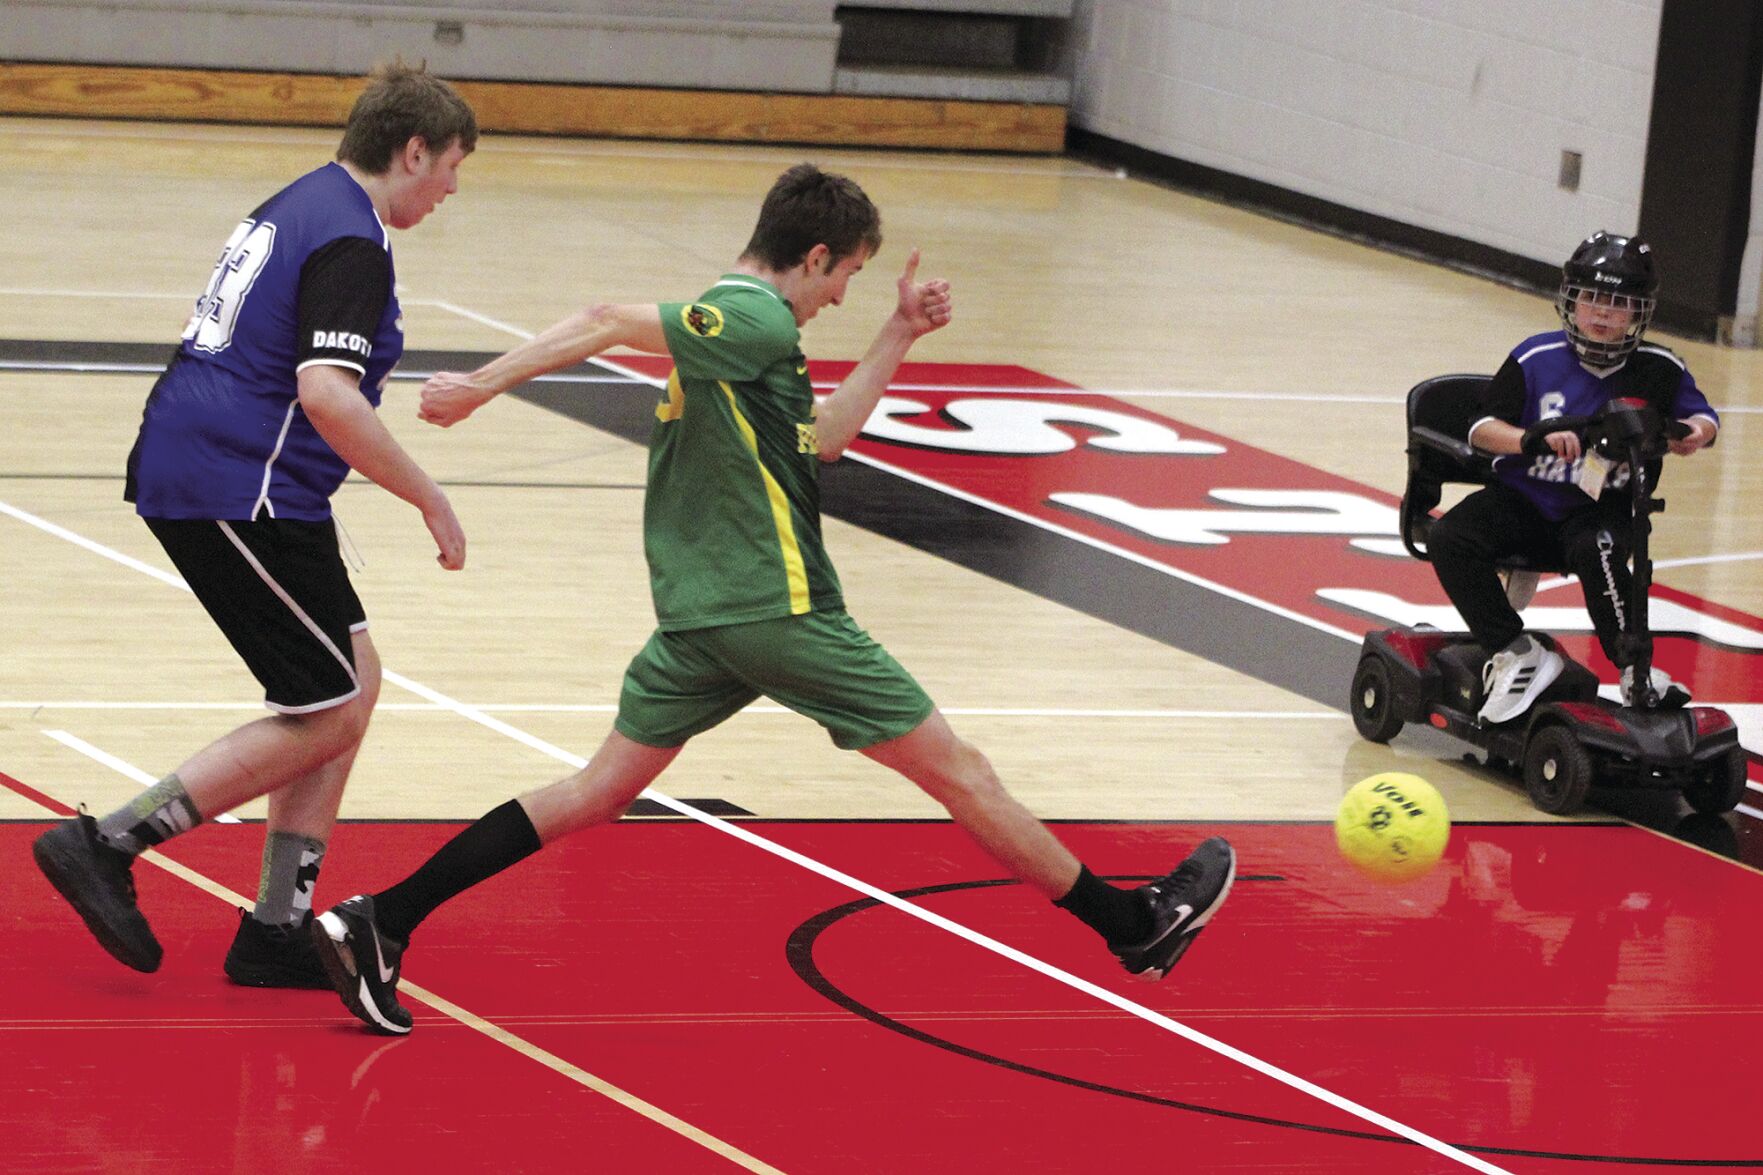 PI adapted soccer team battles to consolation final